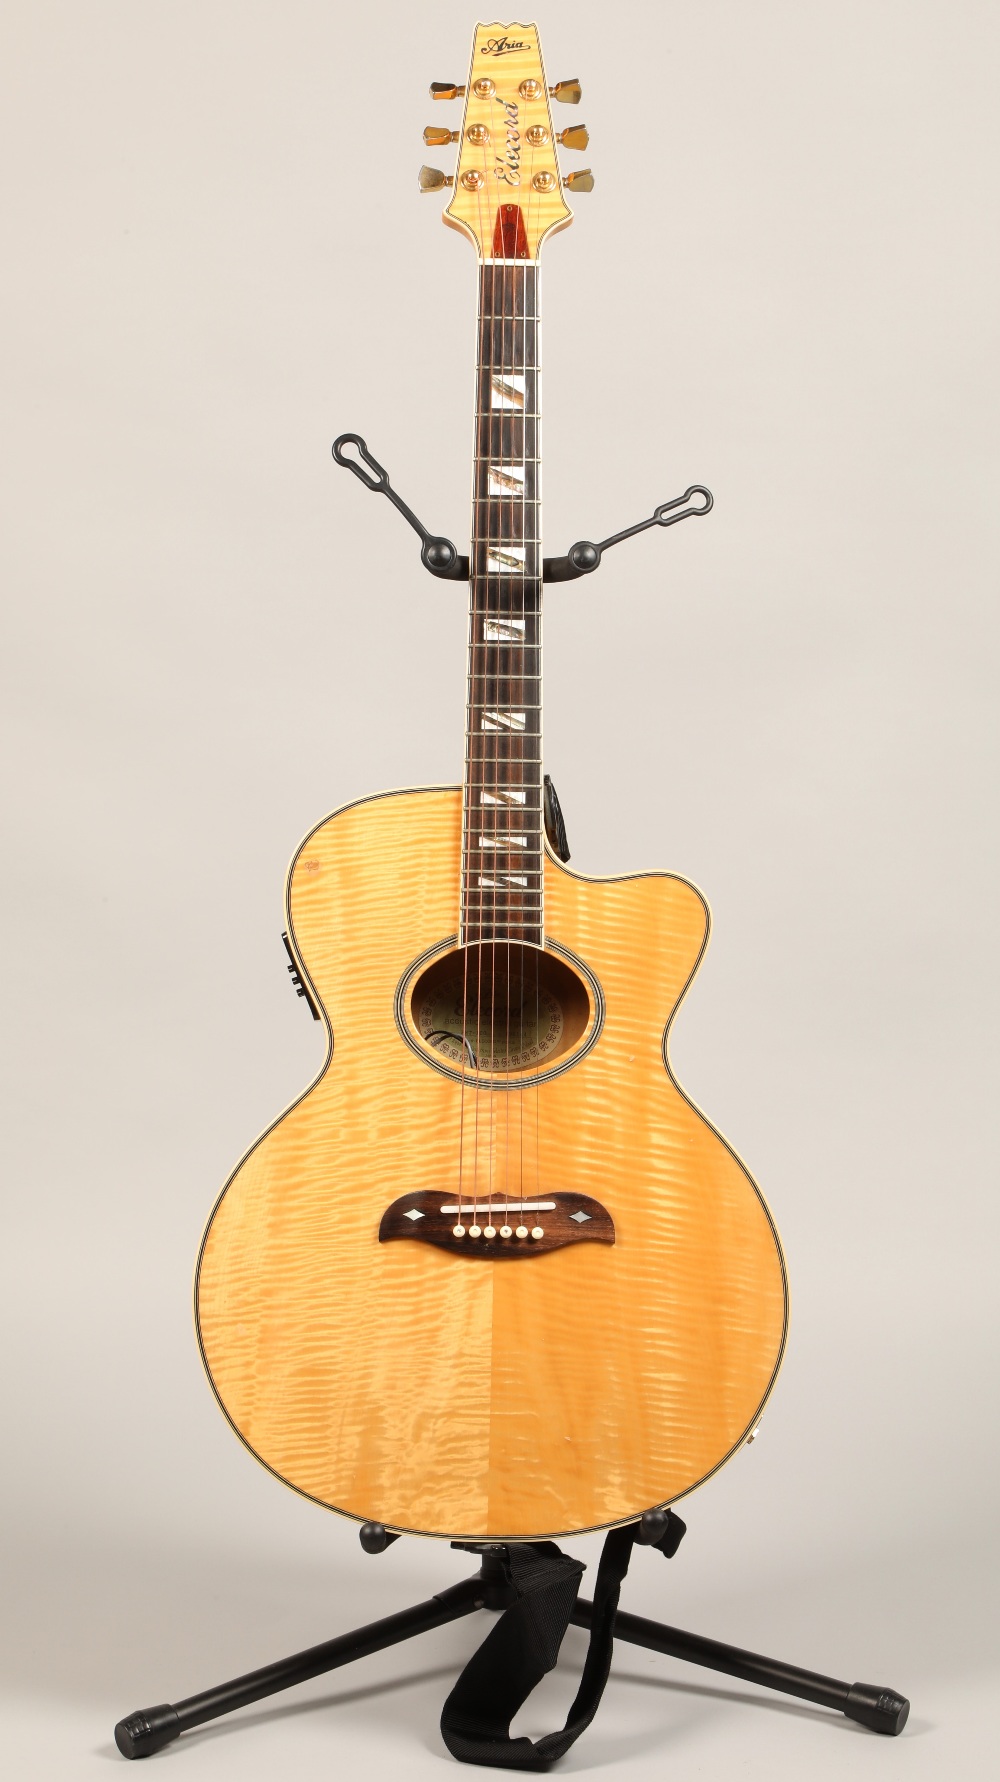 Aria Elecord blonde Fet 100 acoustic electric guitar, serial number 890144 in hard case